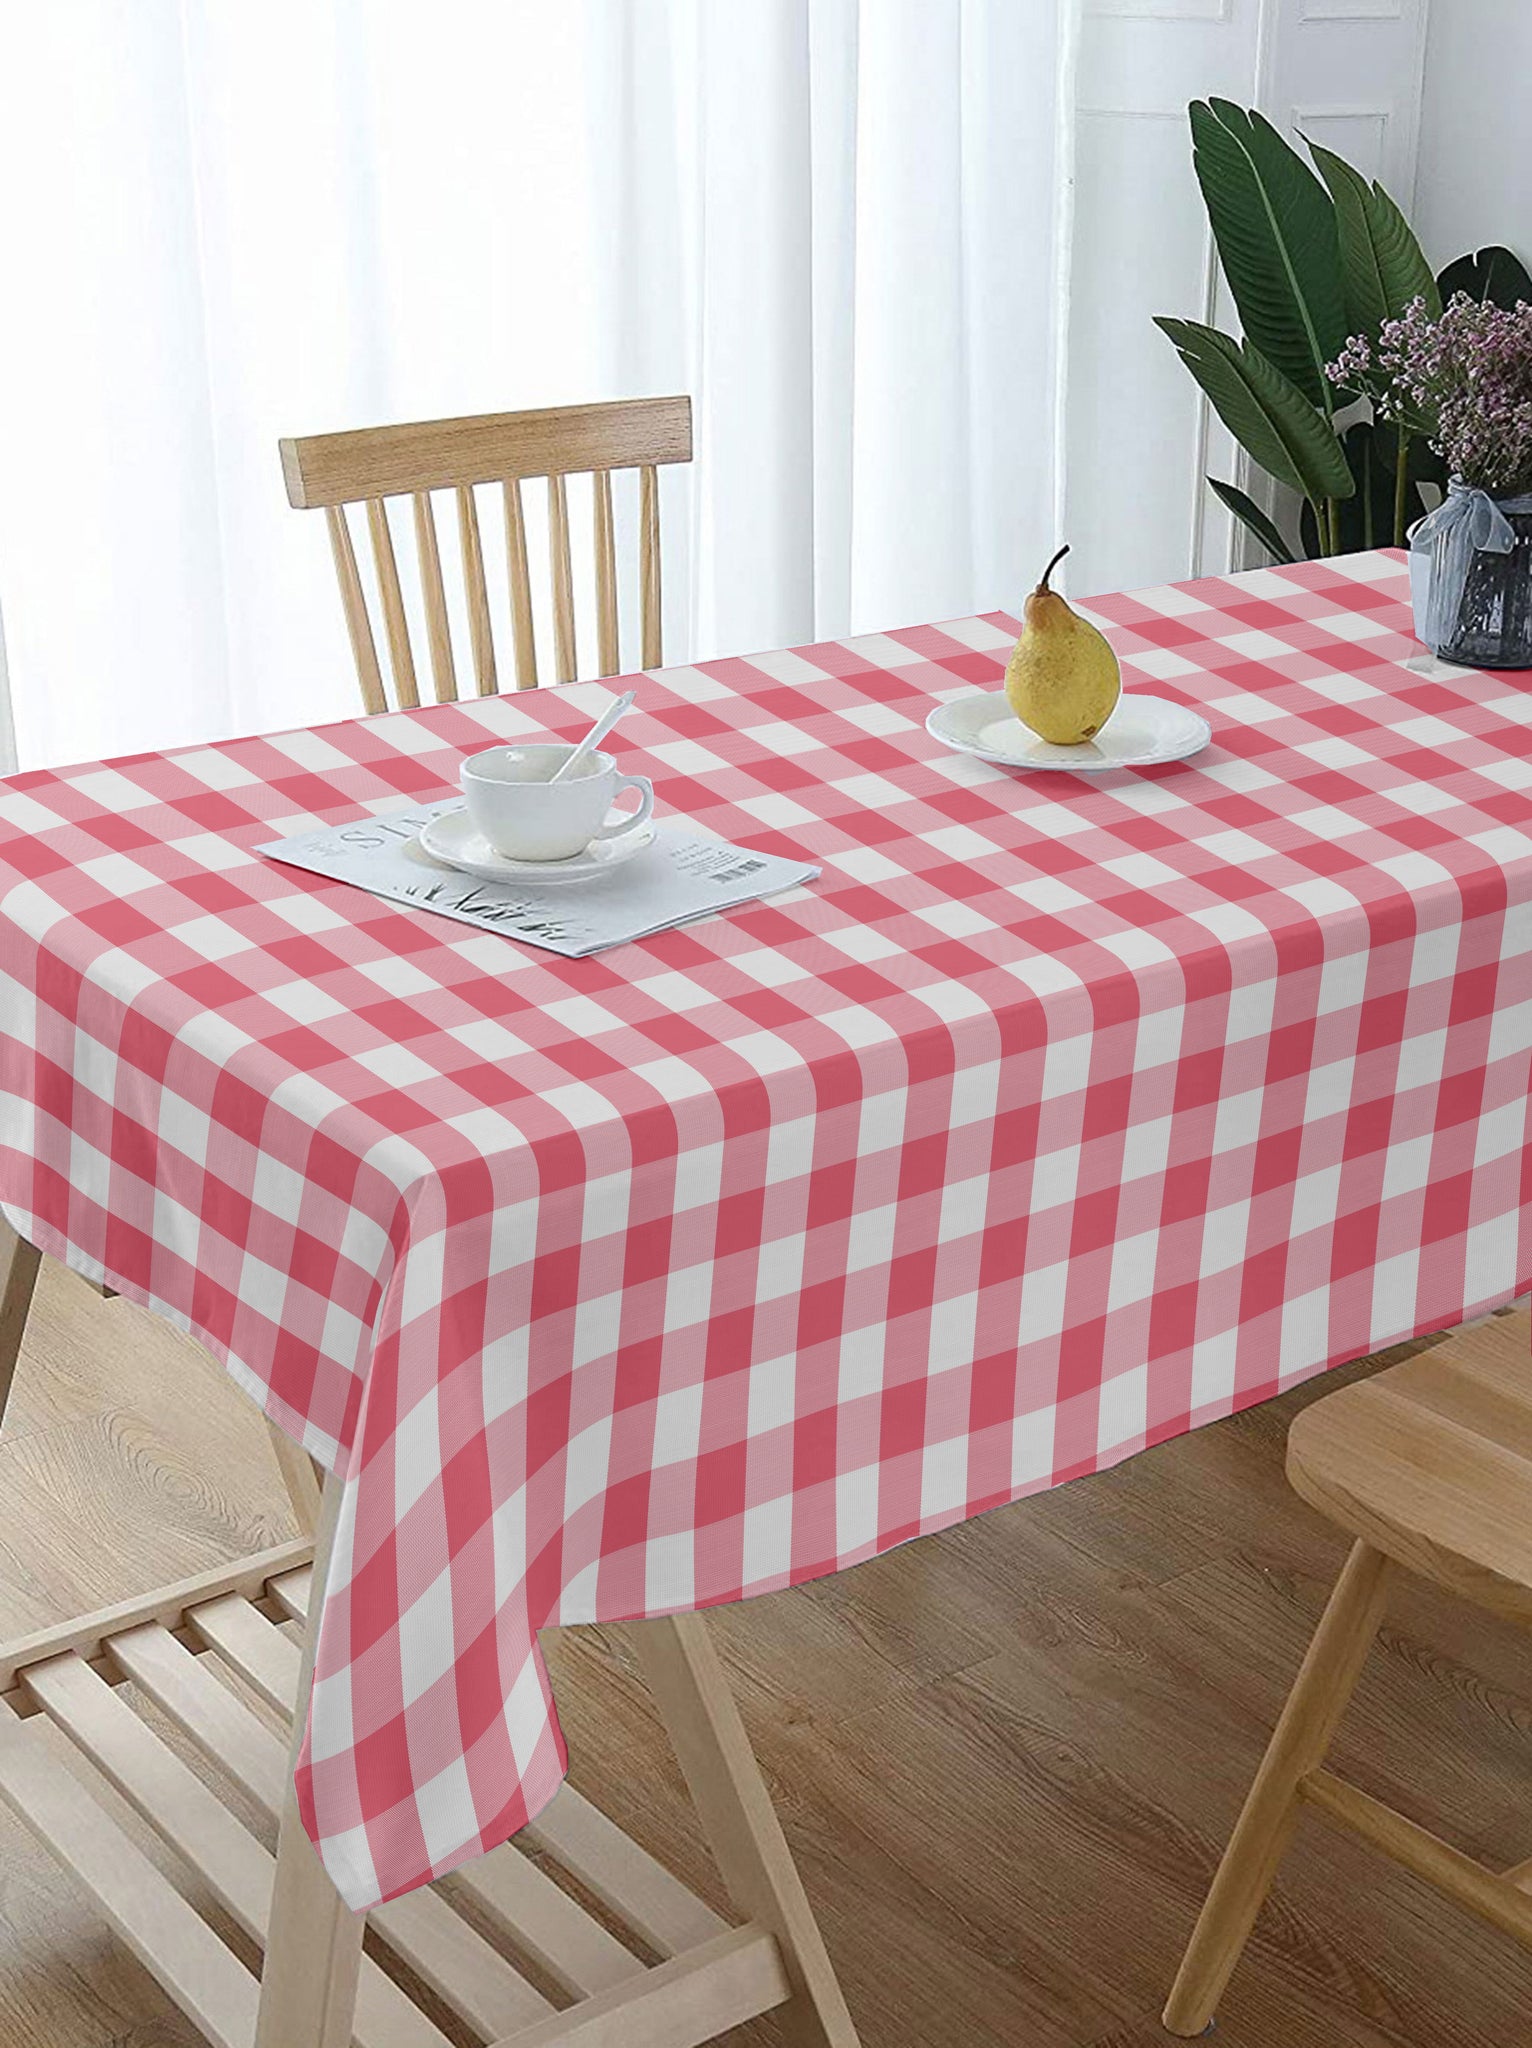 Lushomes table cover, Buffalo Checks Baby Pink Plaid Dining Table Cover Cloth, home decor items, checked table cloth, centre table cover (Size 36 x 60 Inches , Center Table Cloth)